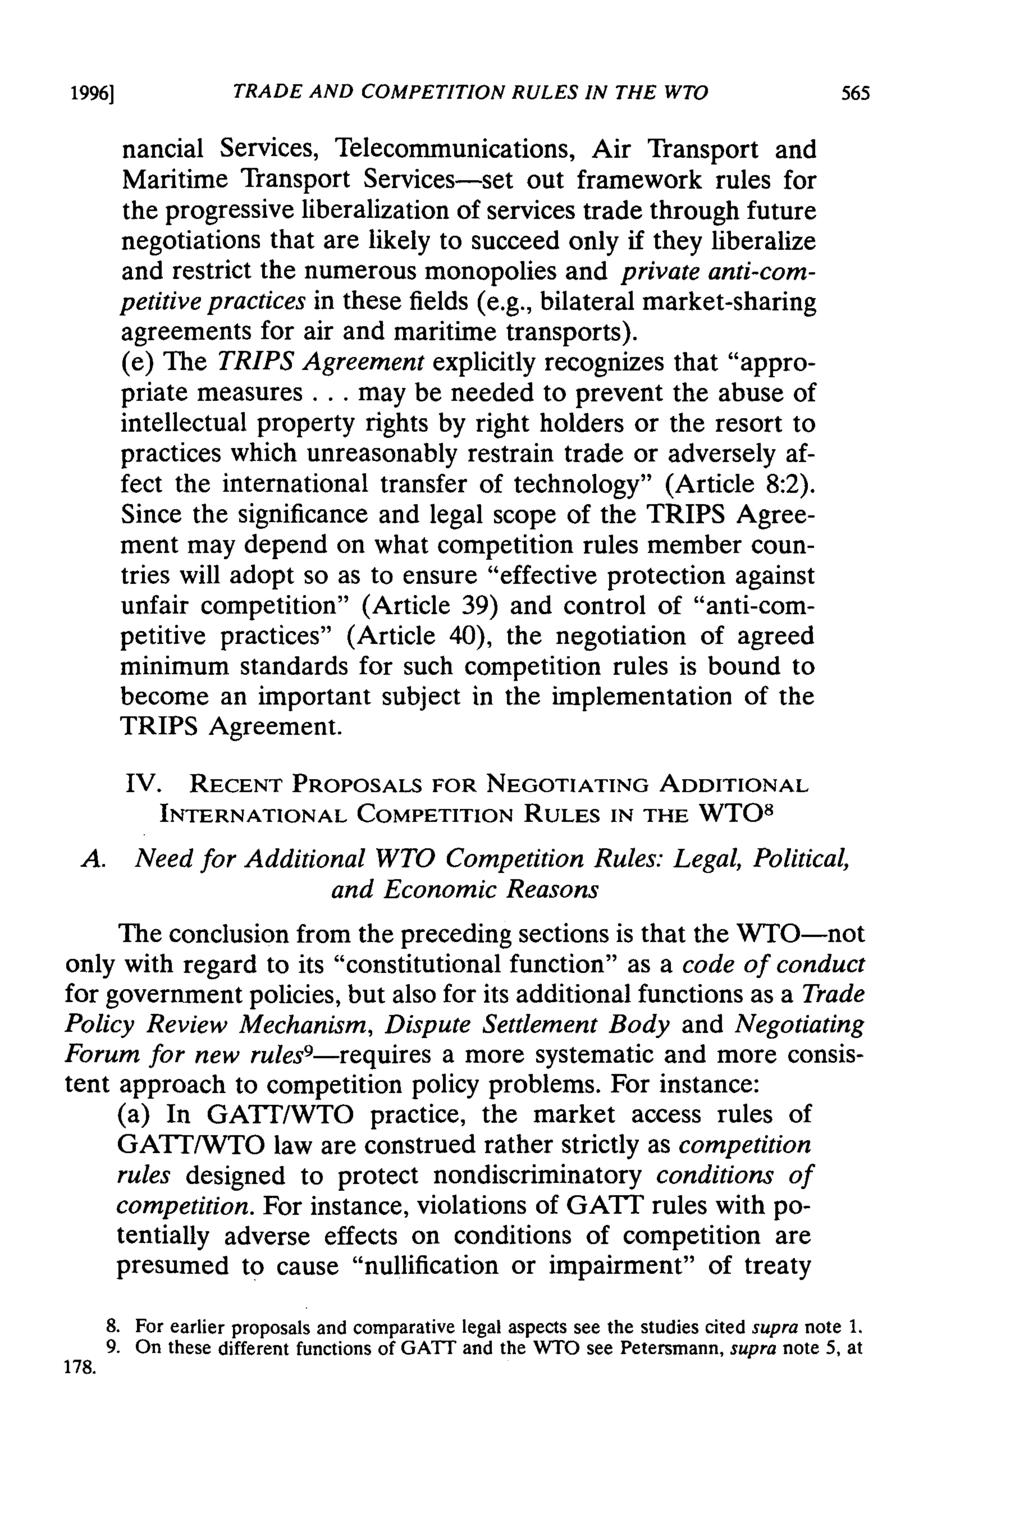 1996] TRADE AND COMPETITION RULES IN THE WTO nancial Services, Telecommunications, Air Transport and Maritime Transport Services-set out framework rules for the progressive liberalization of services